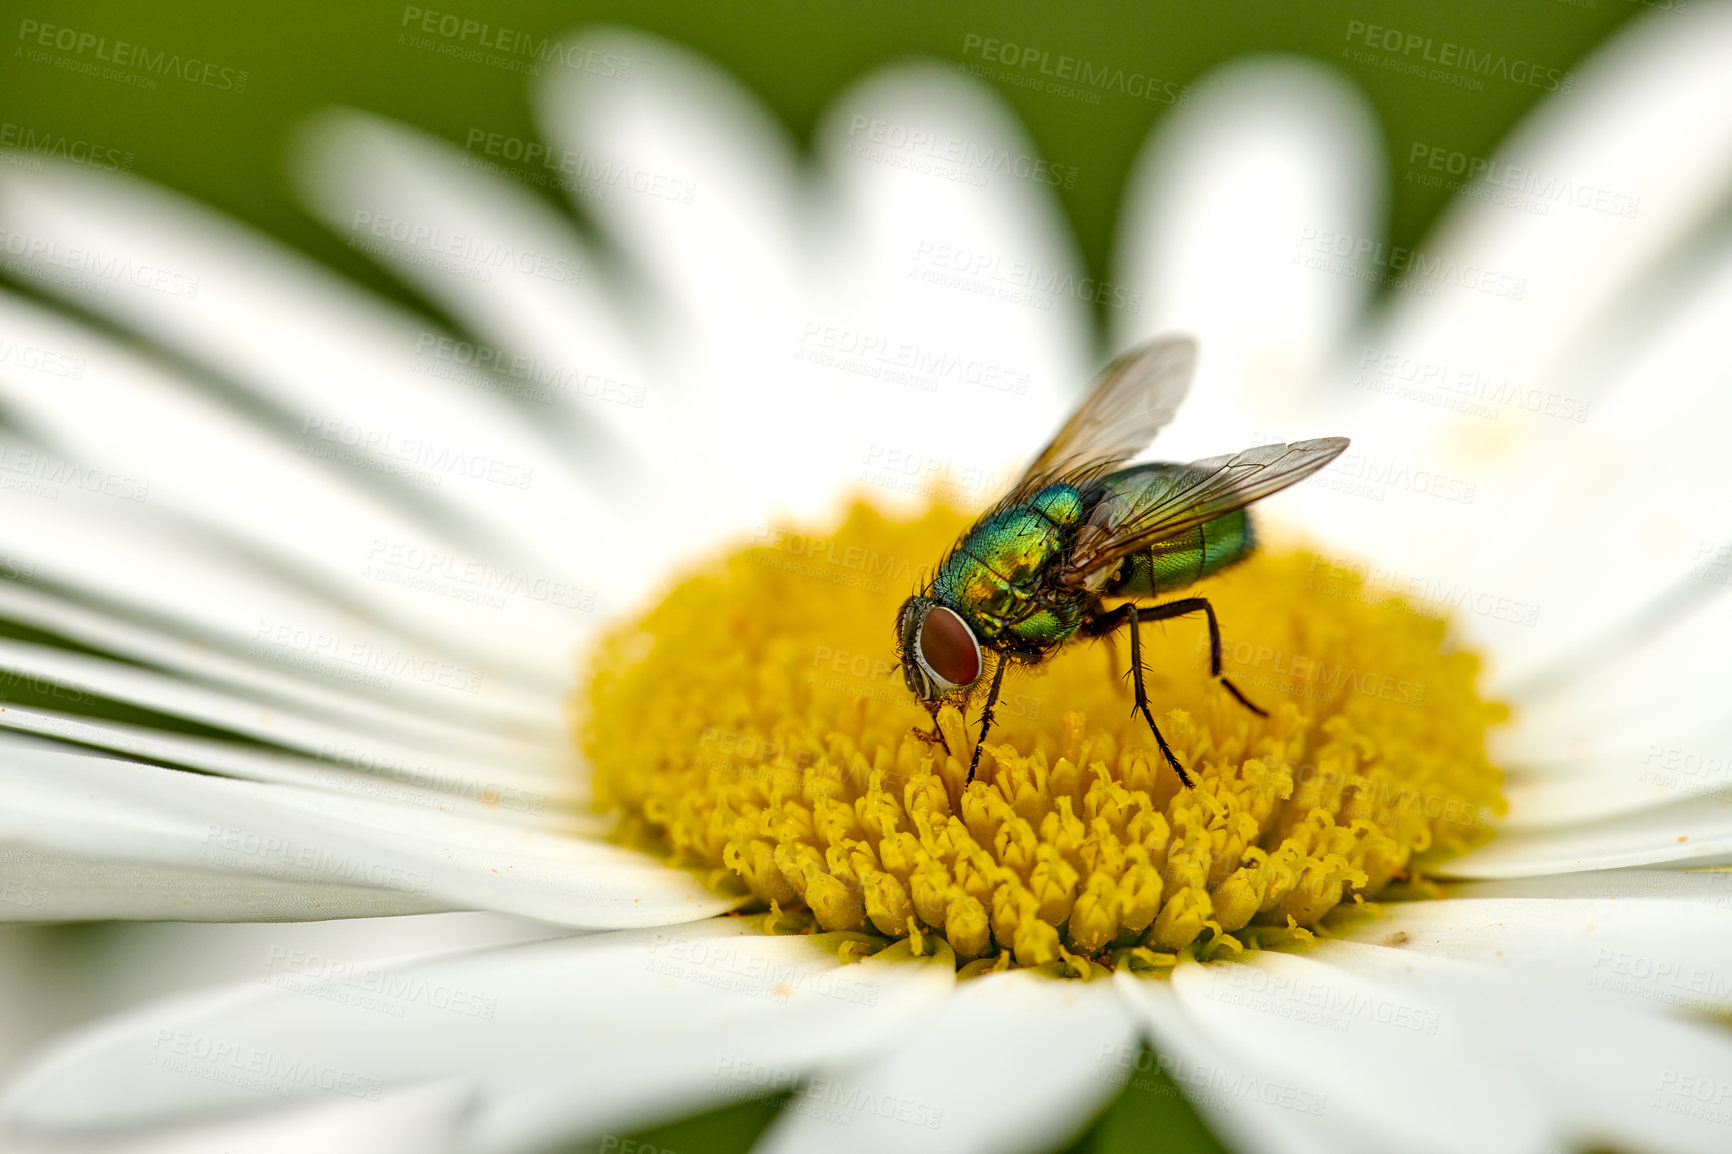 Buy stock photo Common green bottle fly pollinating a white daisy flower outdoors. Closeup of one blowfly feeding off nectar from the yellow pistil on a marguerite plant. Macro of an insect and bug in an ecosystem